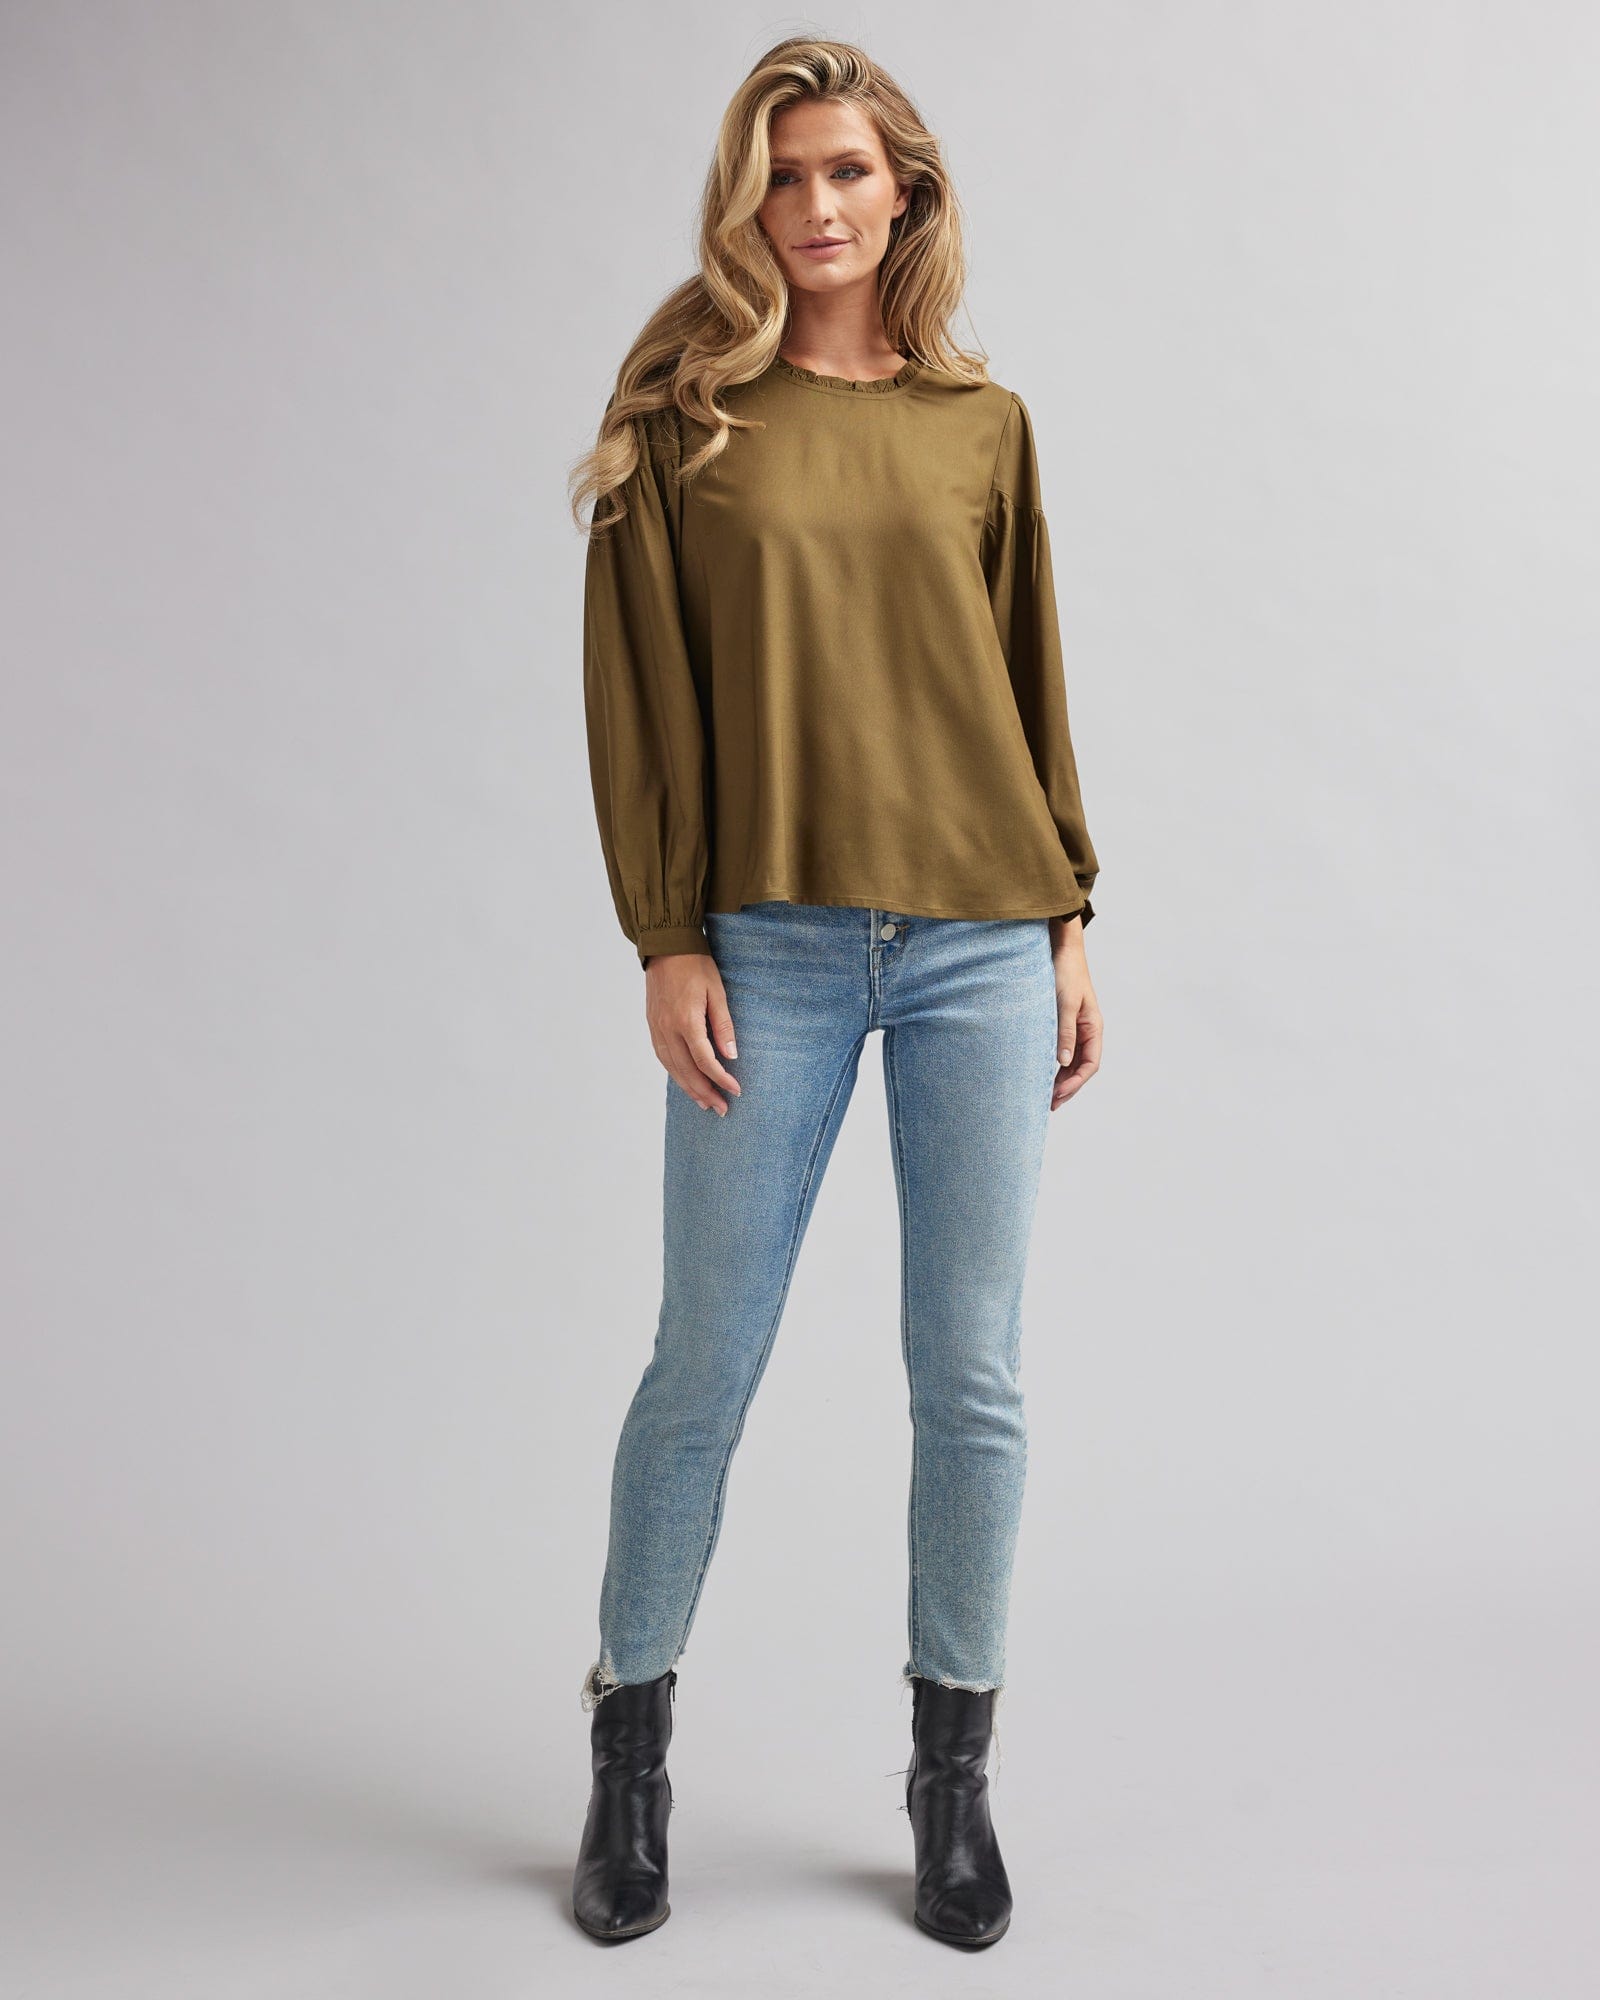 Woman in an olive green, ong sleeve blouse